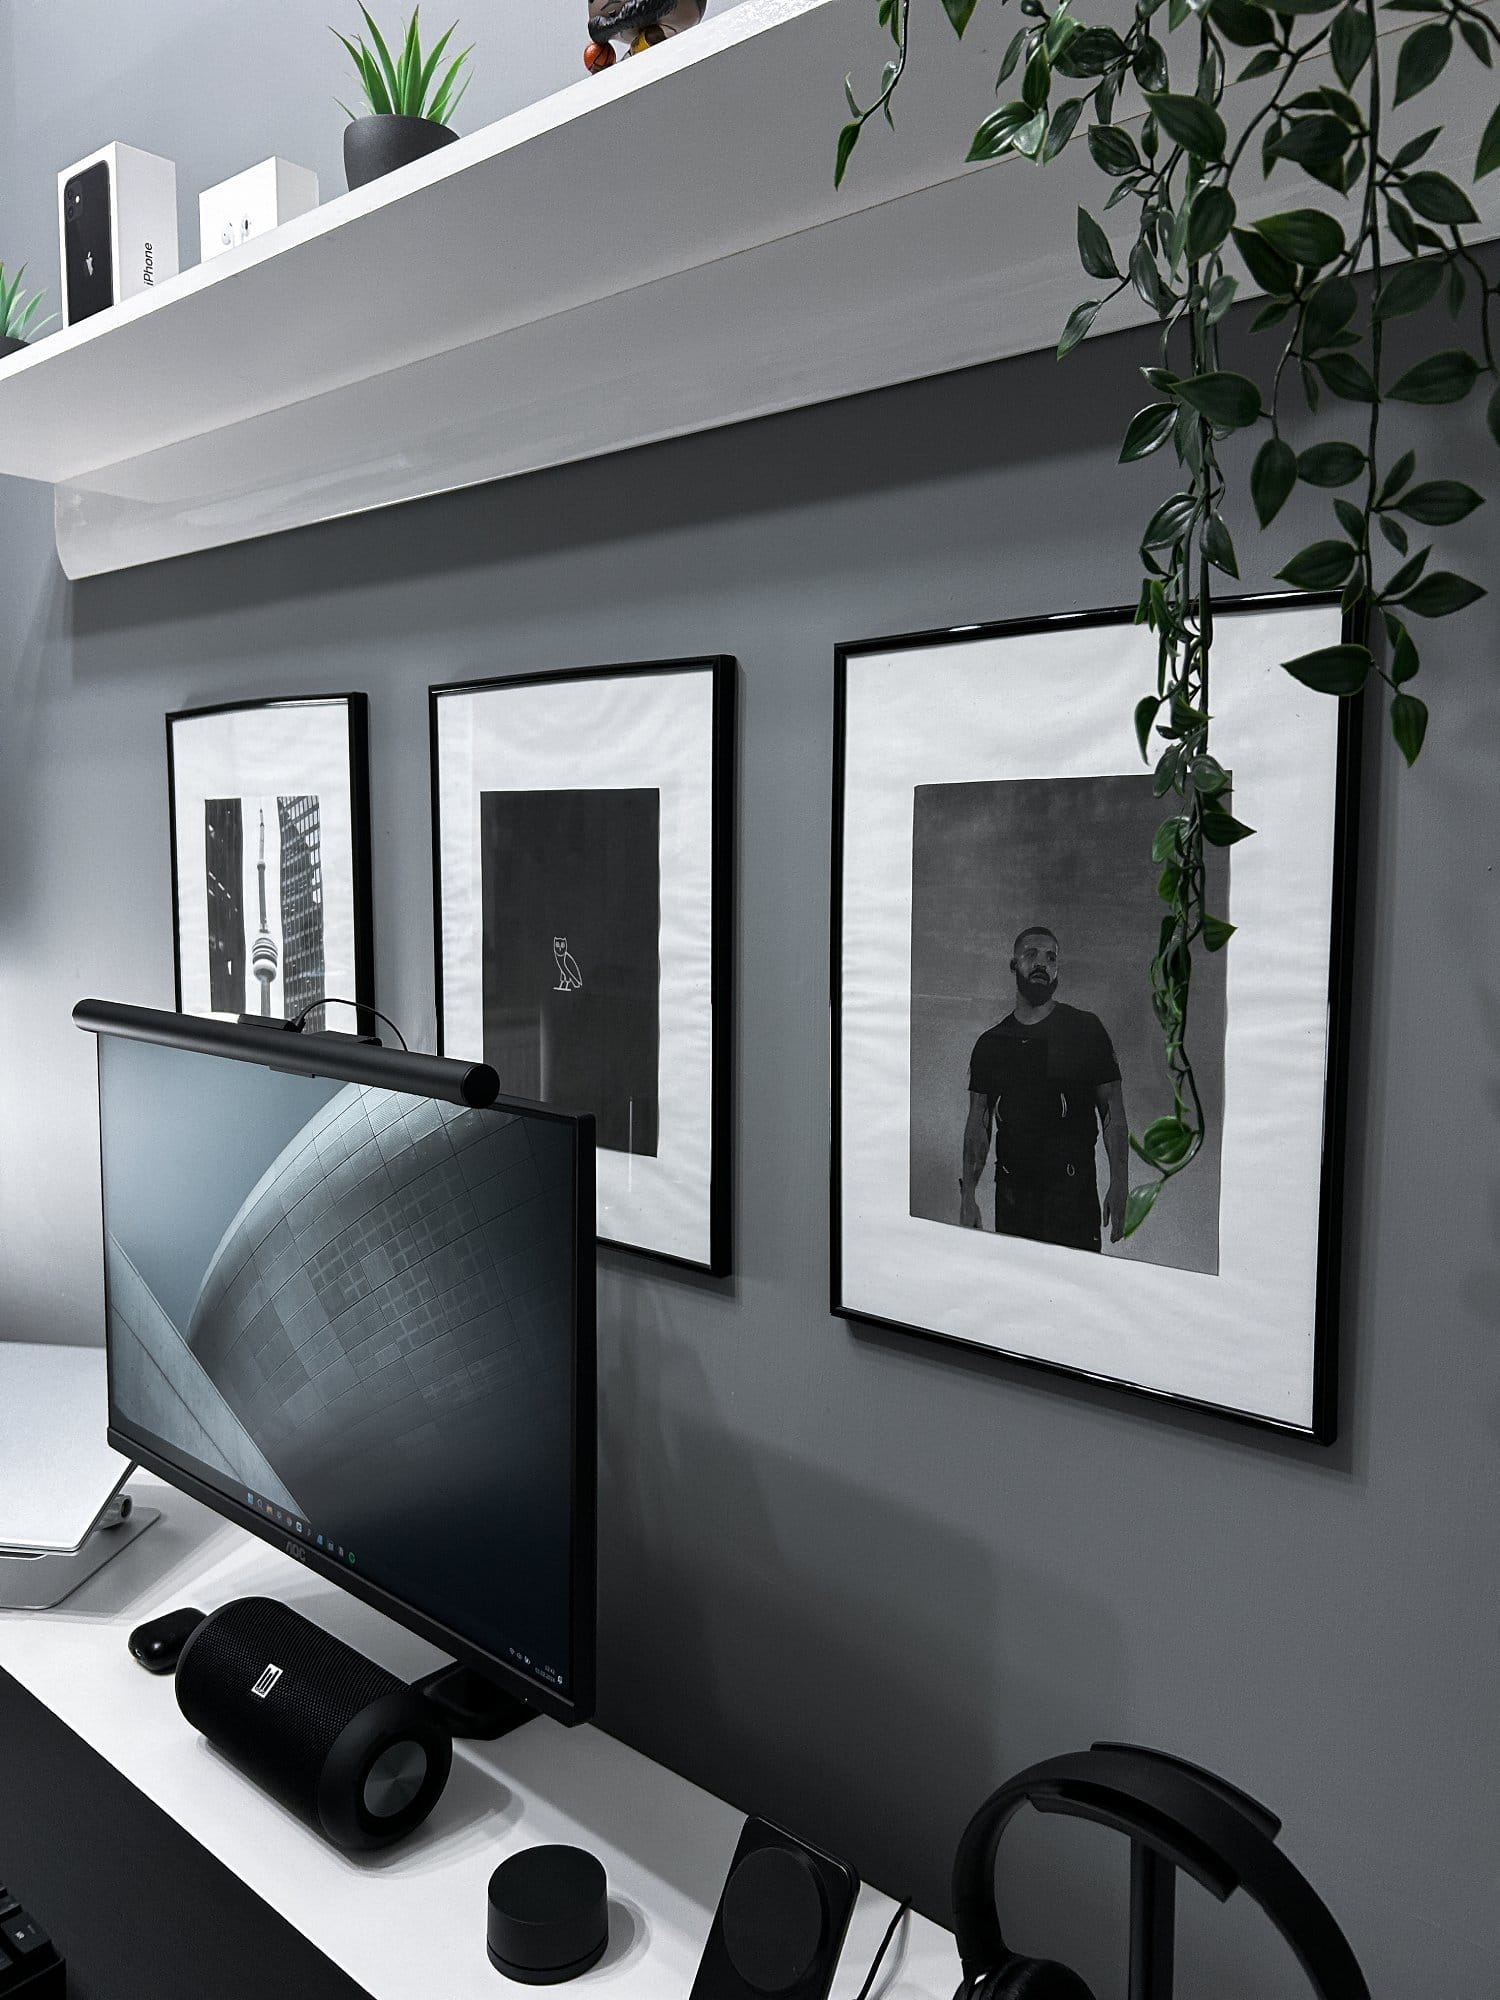 A home office corner with a monitor, speaker, and headphones on a white desk, with framed black and white pictures on the wall, complemented by a trailing plant and decorative items on a shelf above